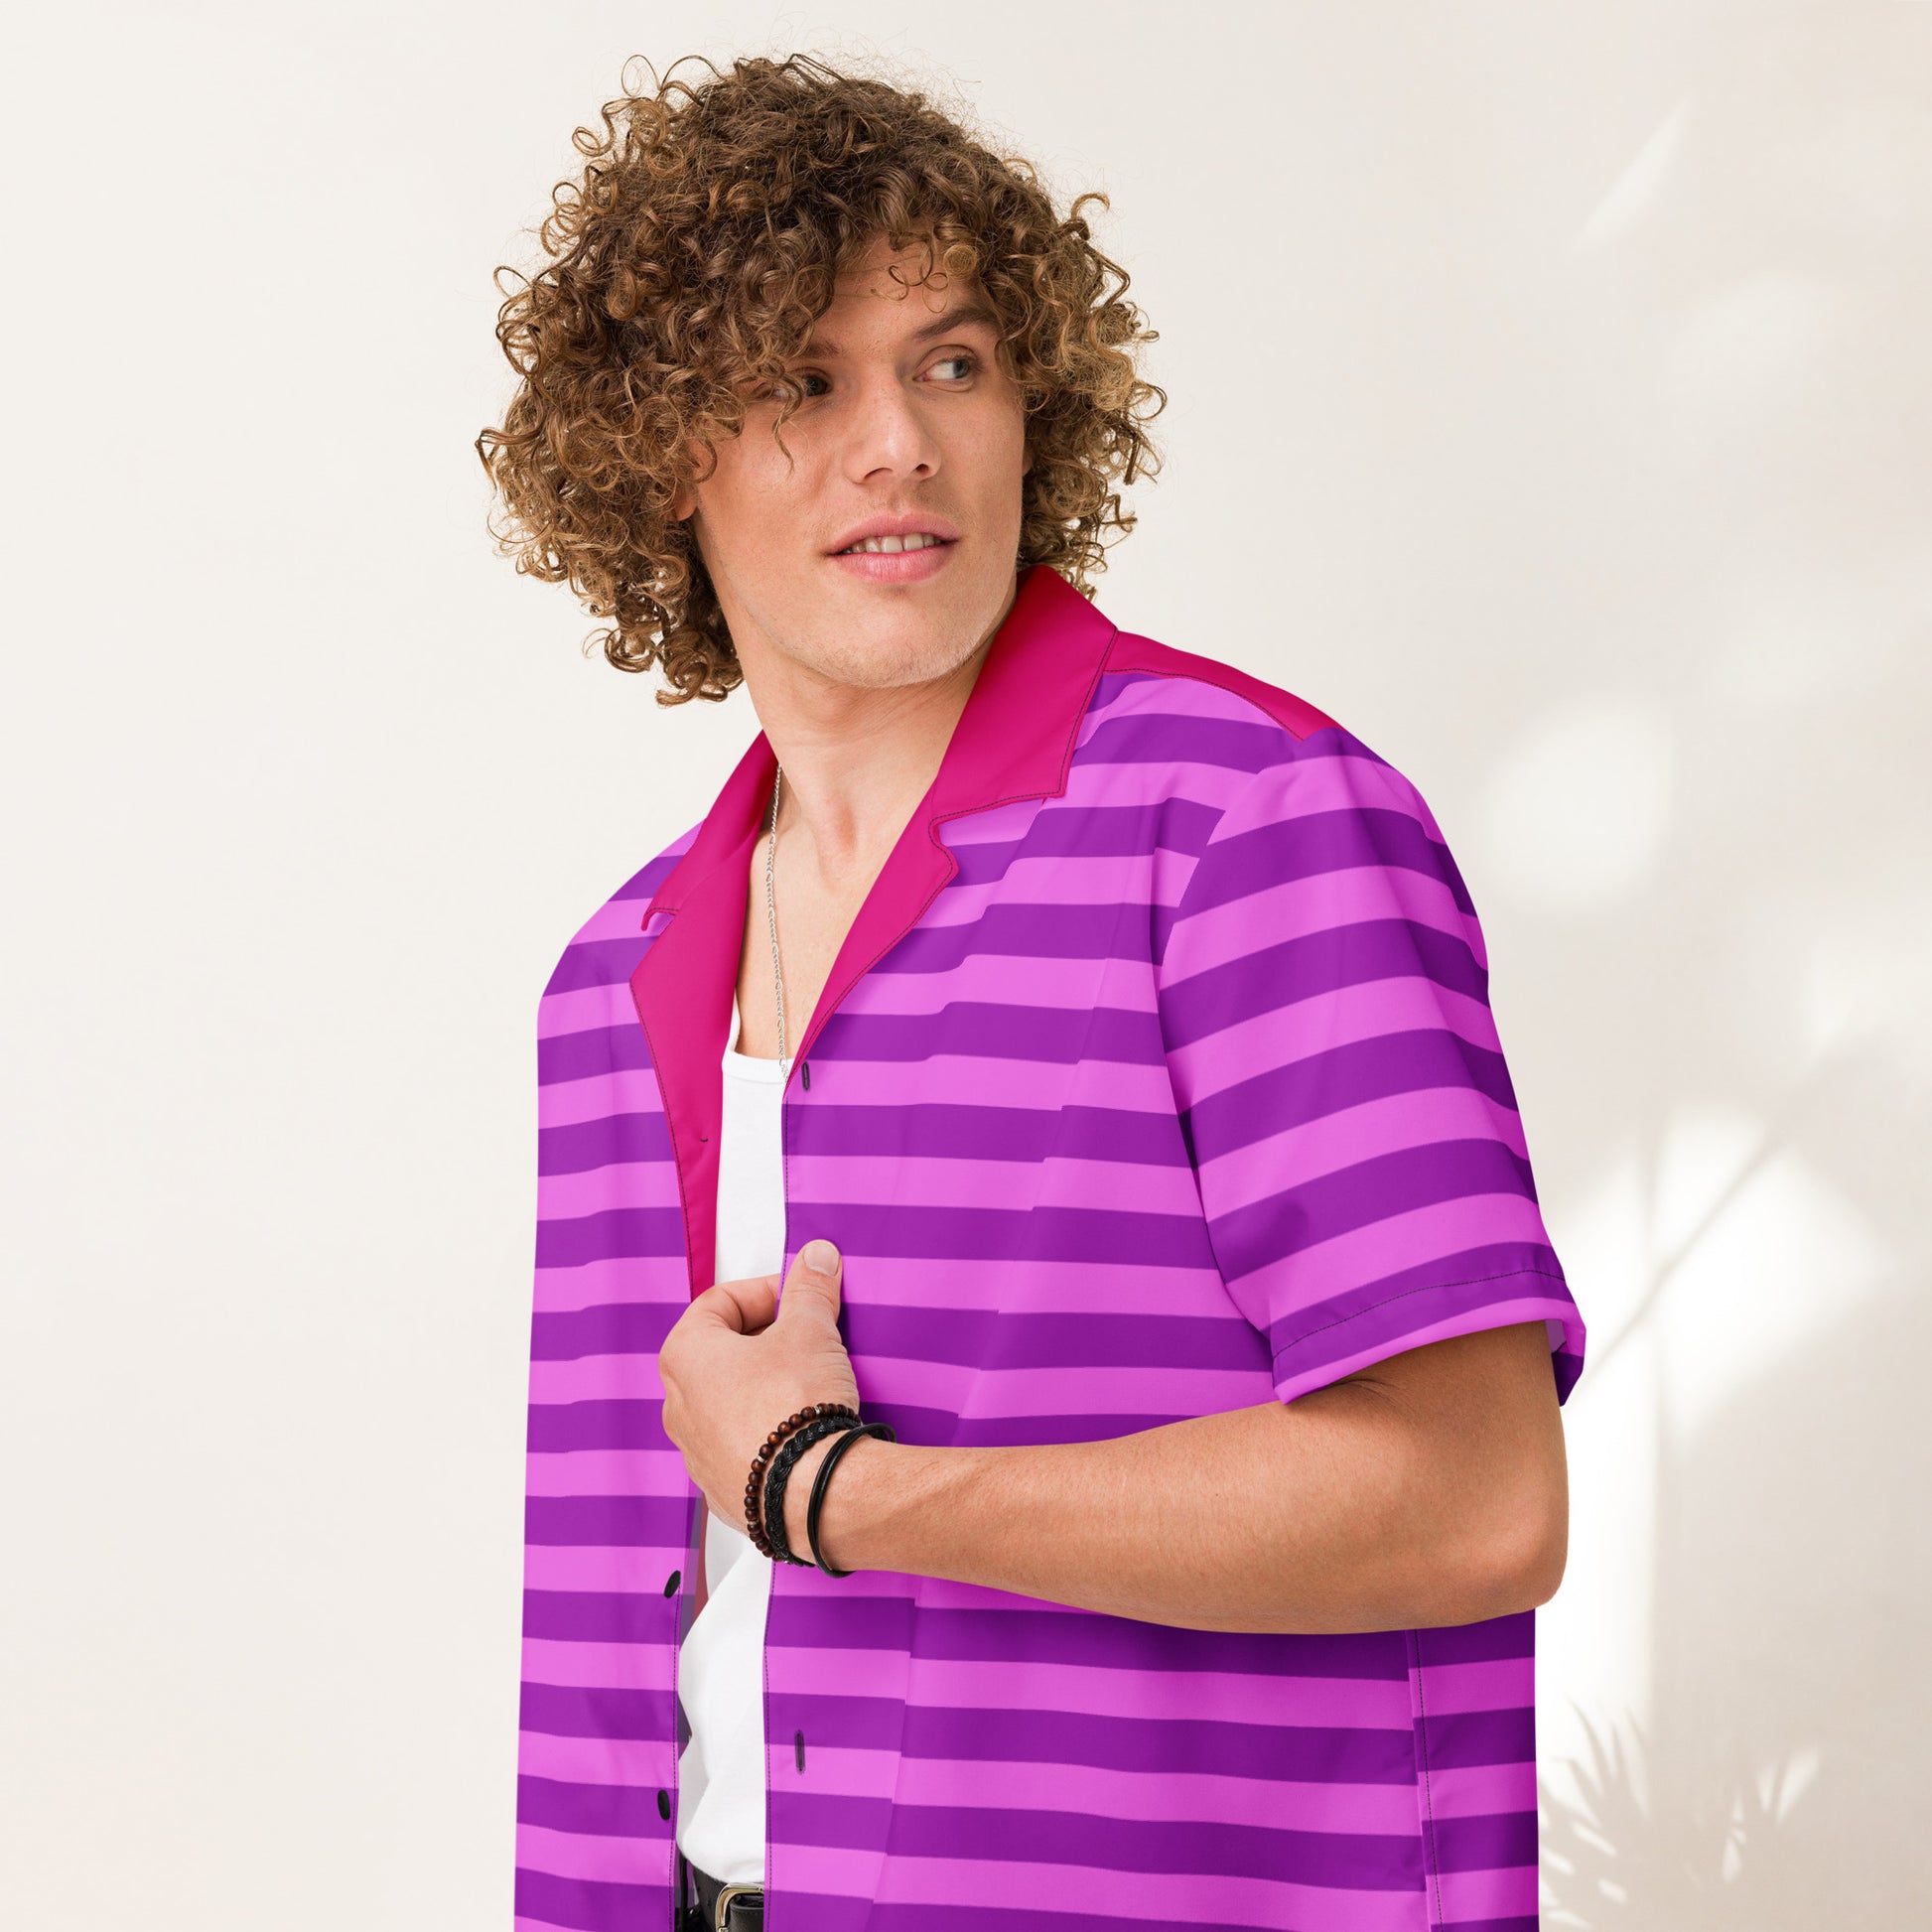 Stylishly Striped: Short-Sleeve Shirt Featuring Pink Stripes and Button